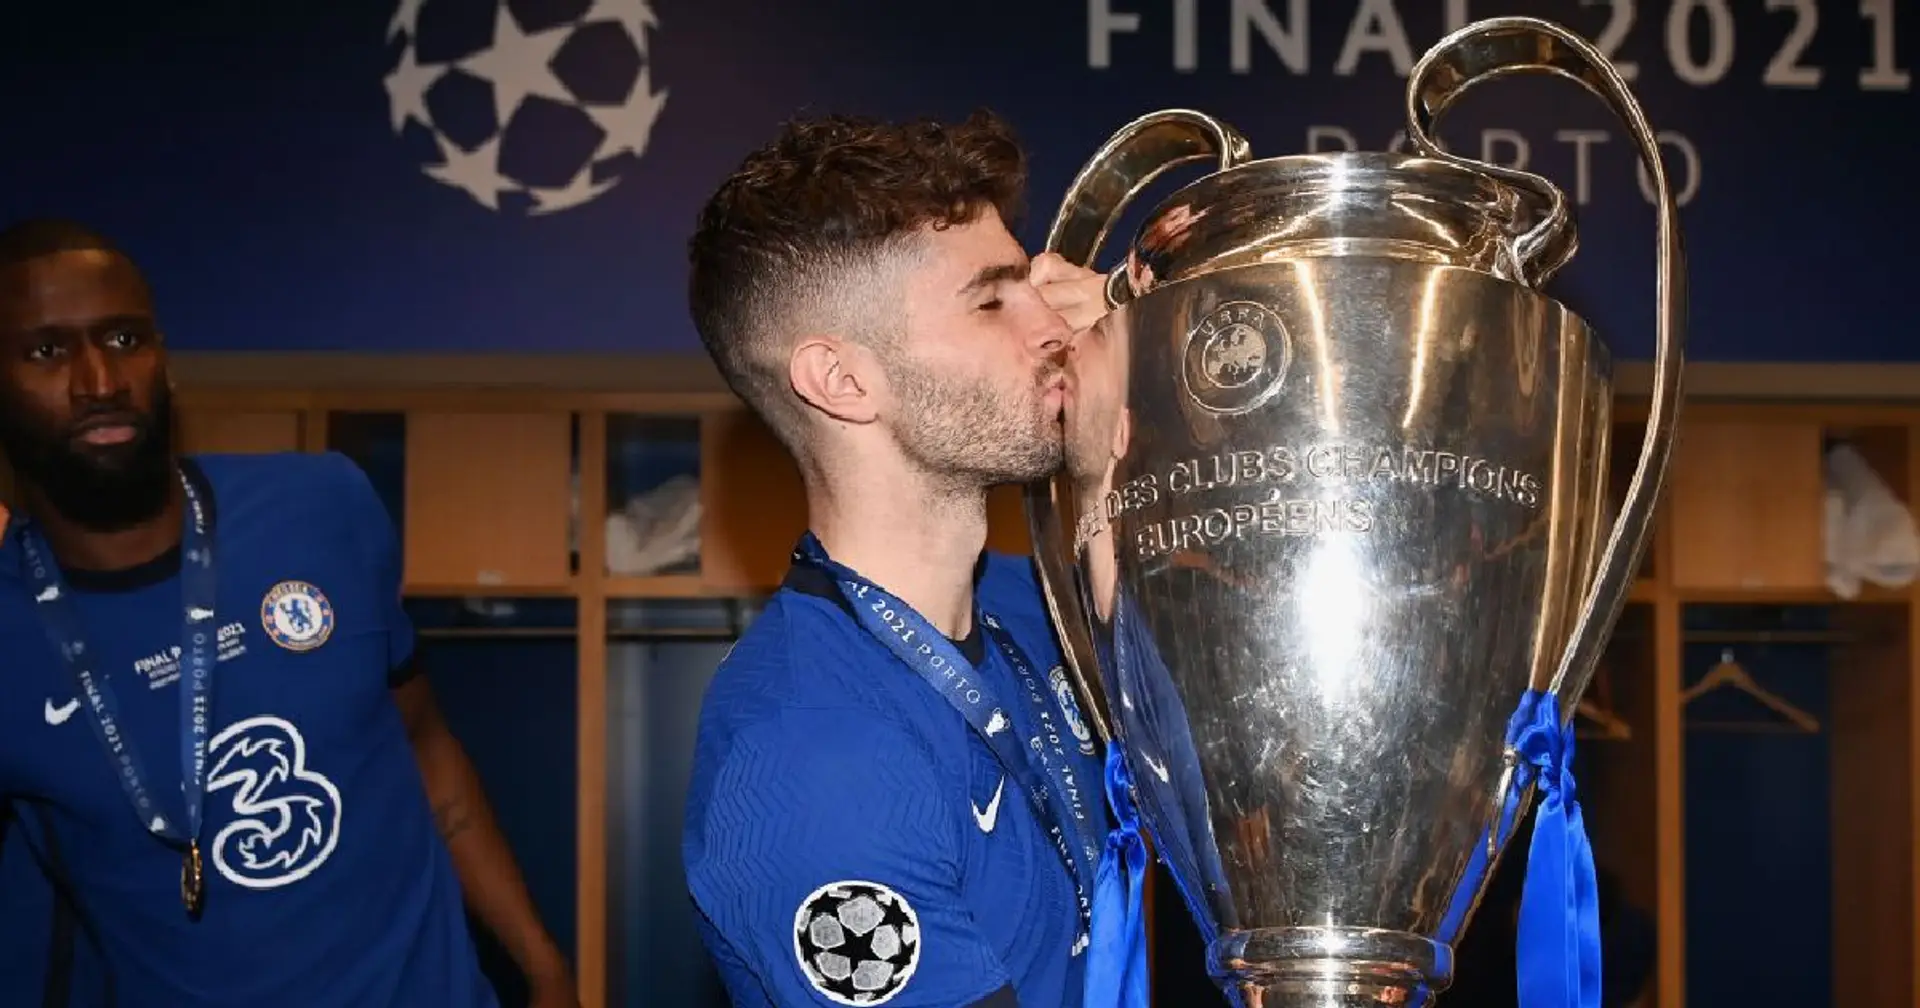 'We're hungry for more this year': Pulisic talks Chelsea's Champions League hopes